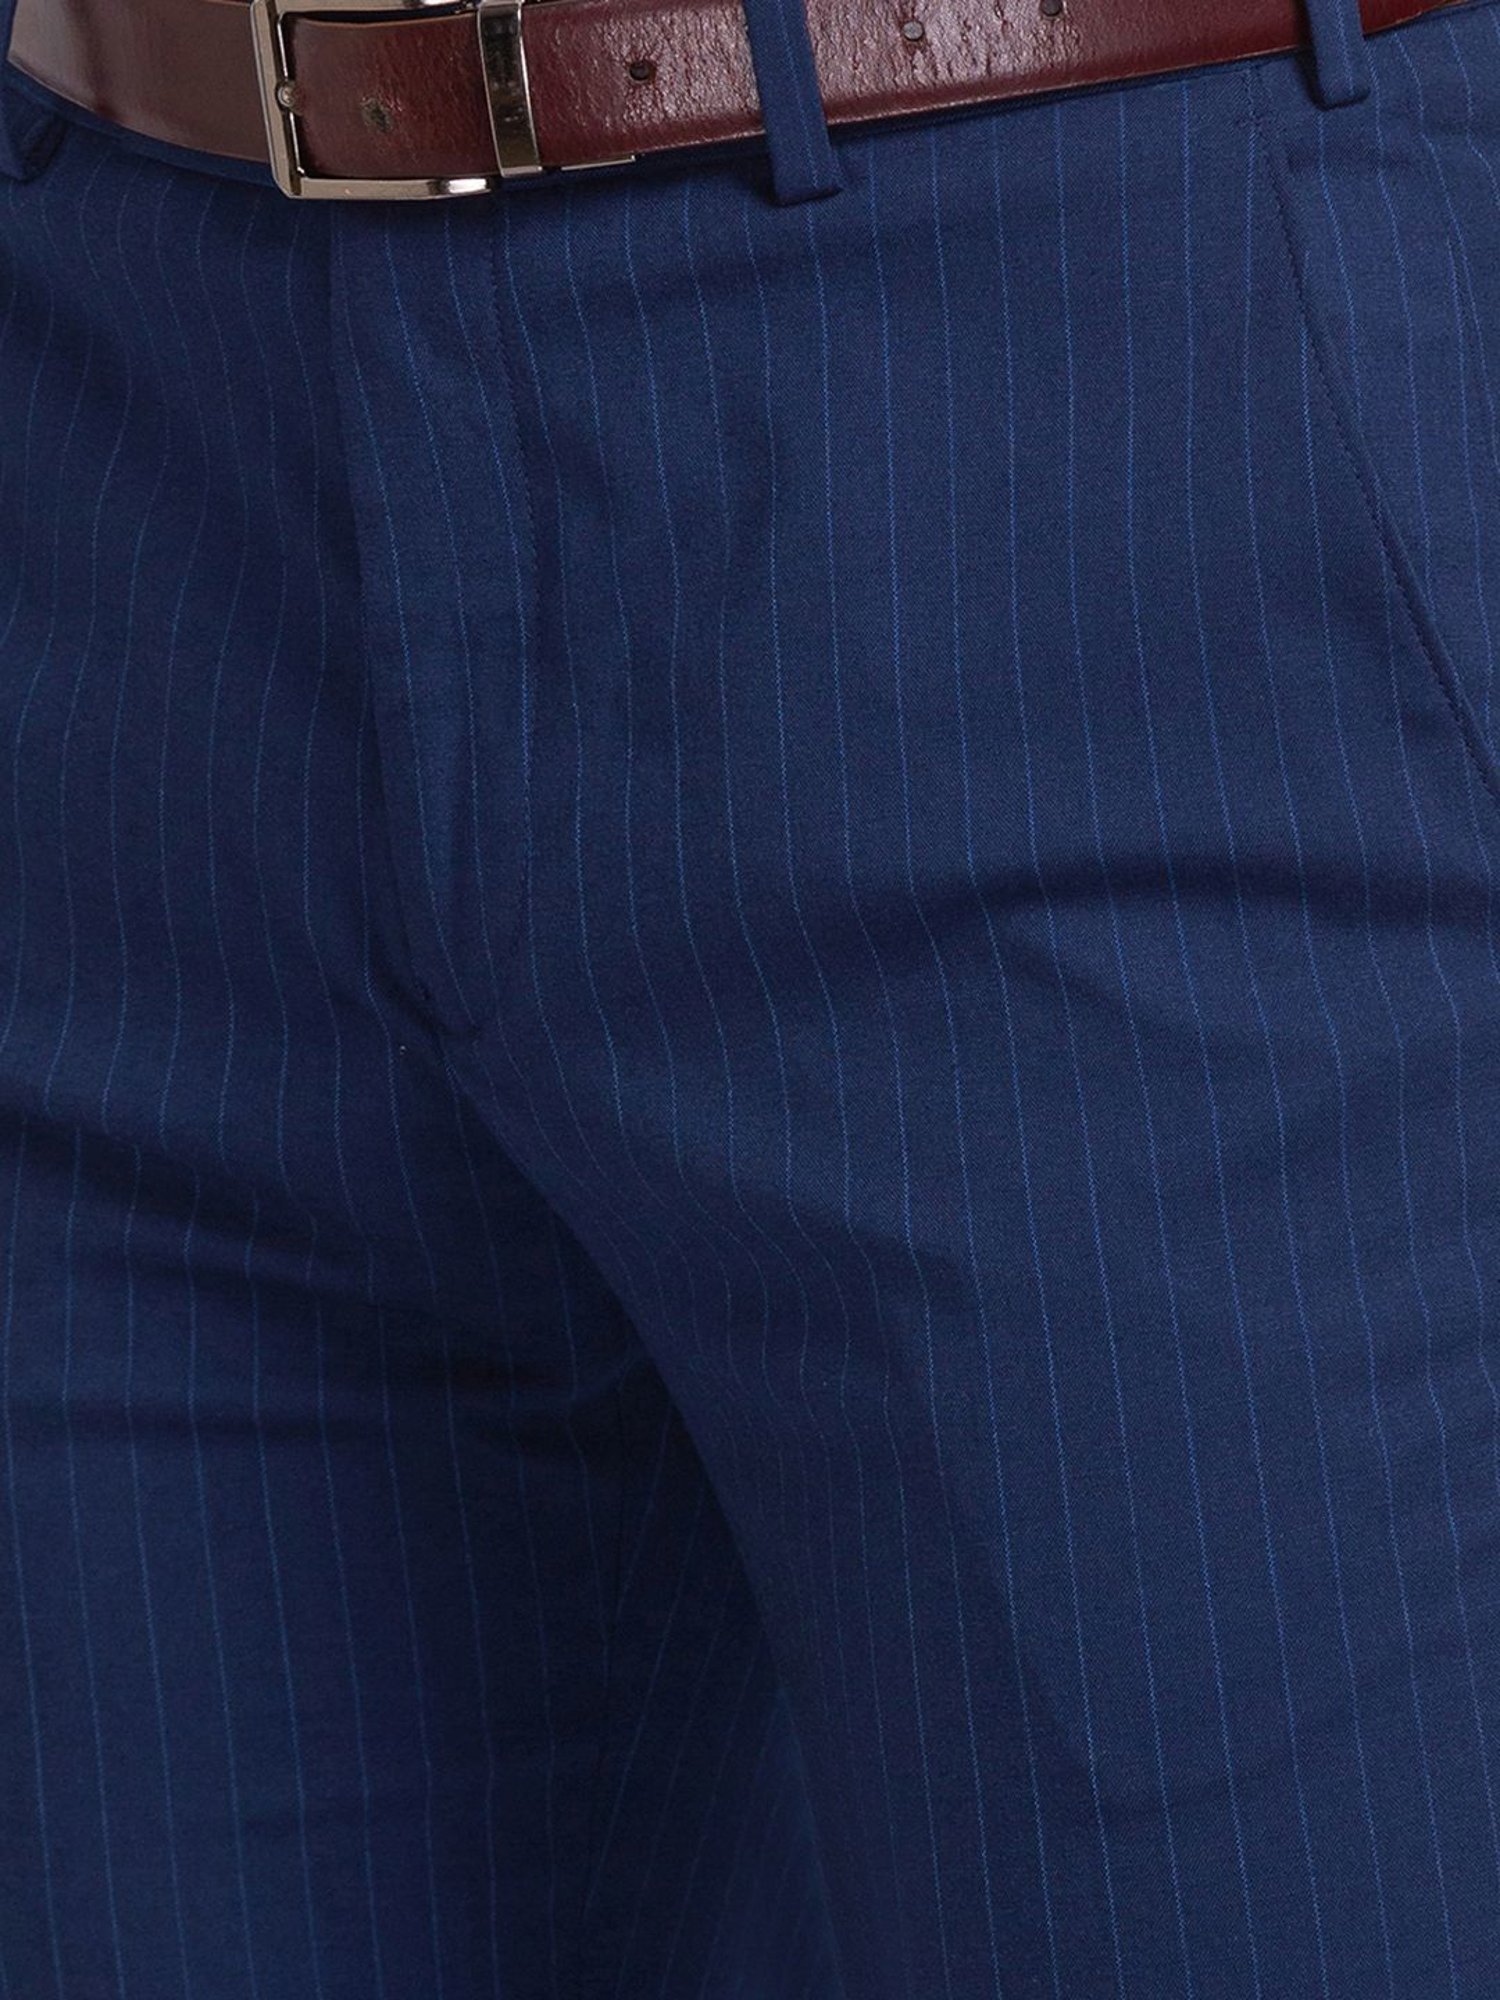 Navy blue striped suit trousers | The Kooples - US